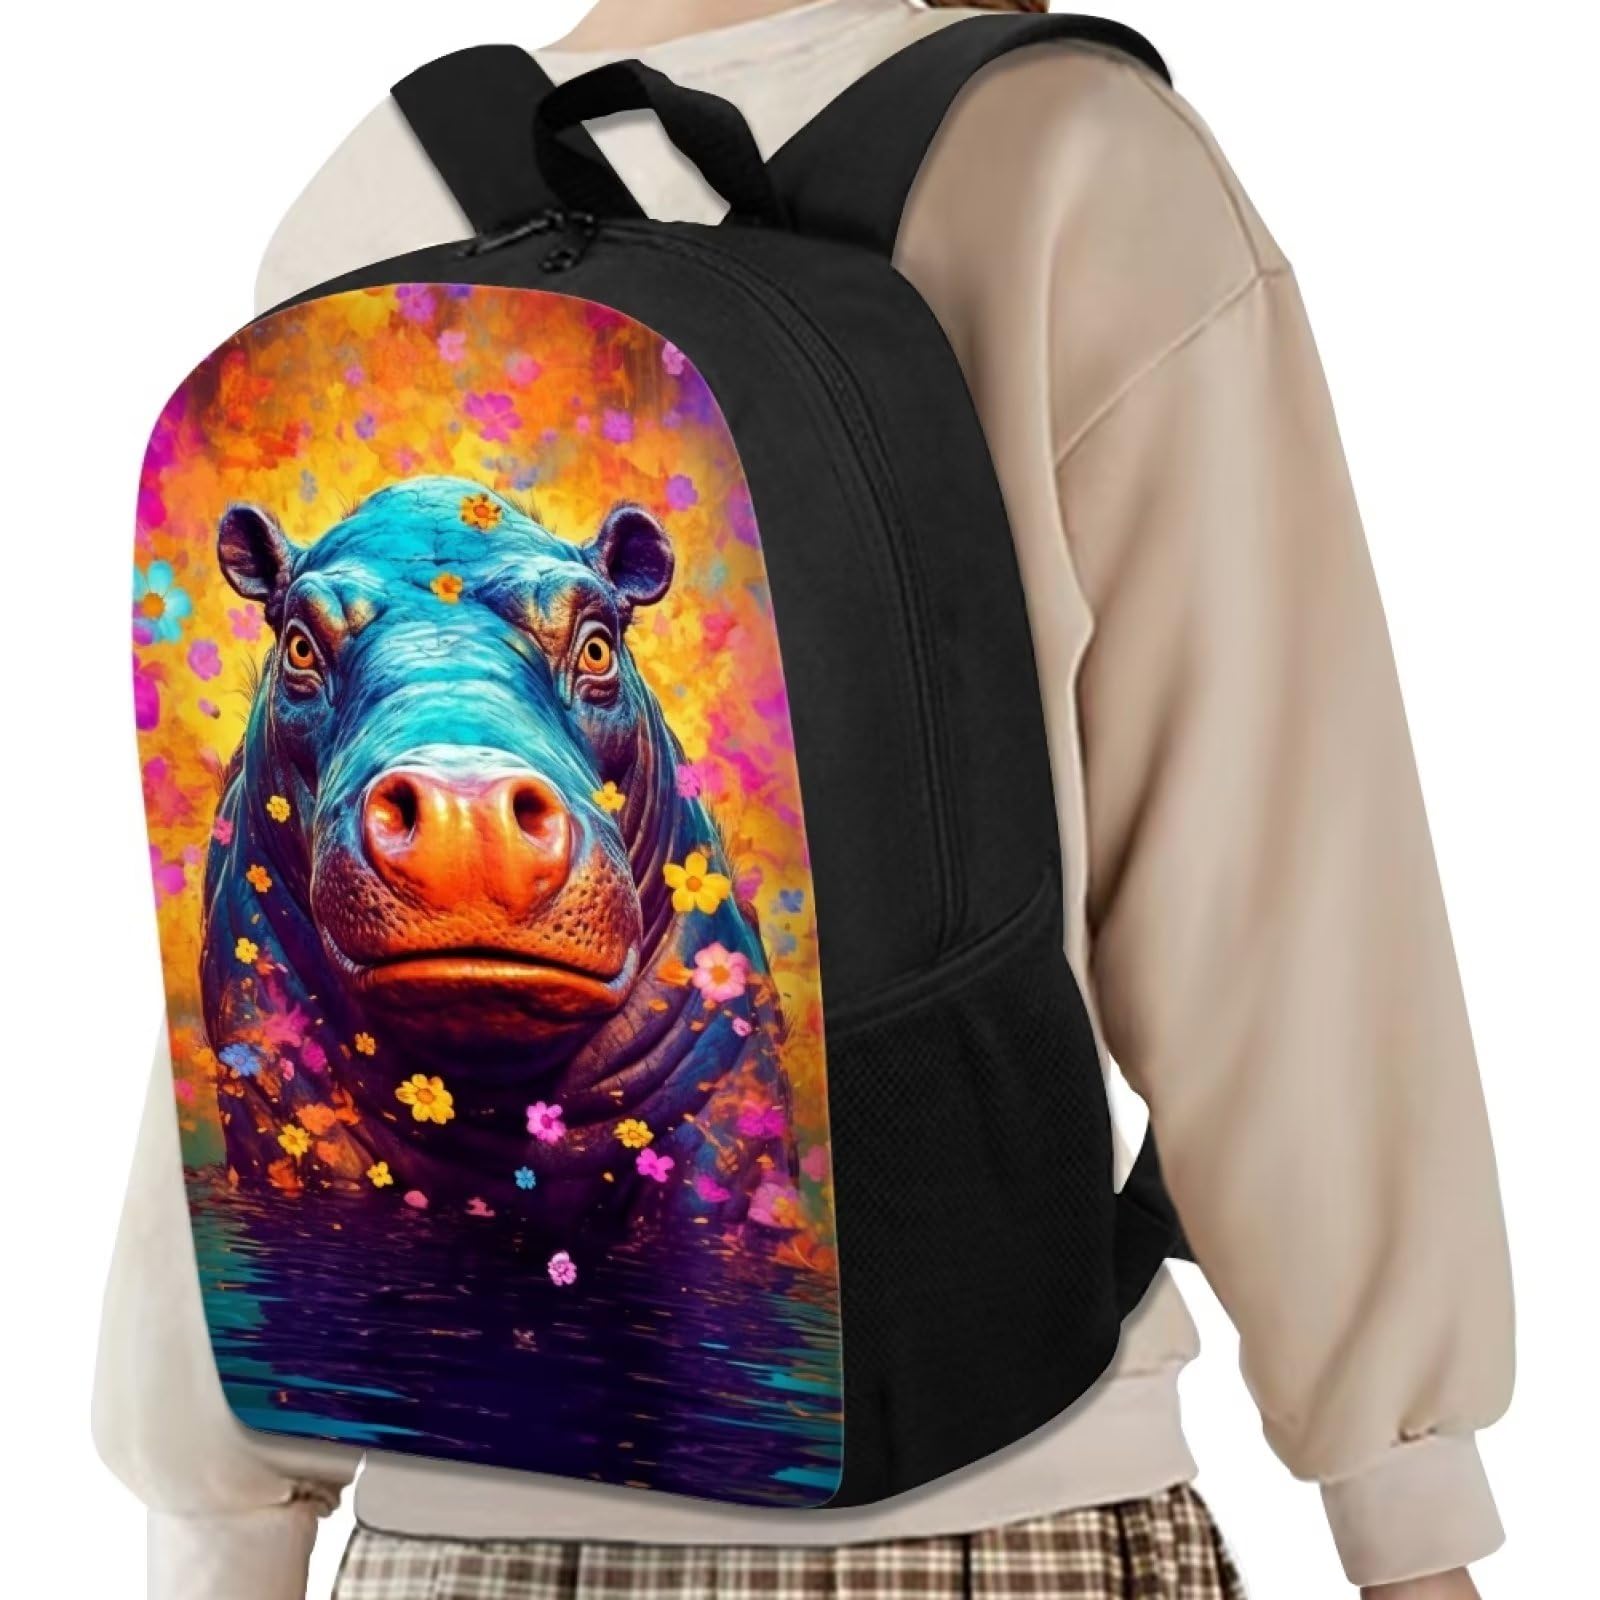 Kids Cool Animal Backpack Black Aesthetic Personalized Funny Floral Hippo School Backpack for Boys Girls Padded Back & Straps Comfy Lightweight Cute Bookbag 17 Inch Student Basic Daypack